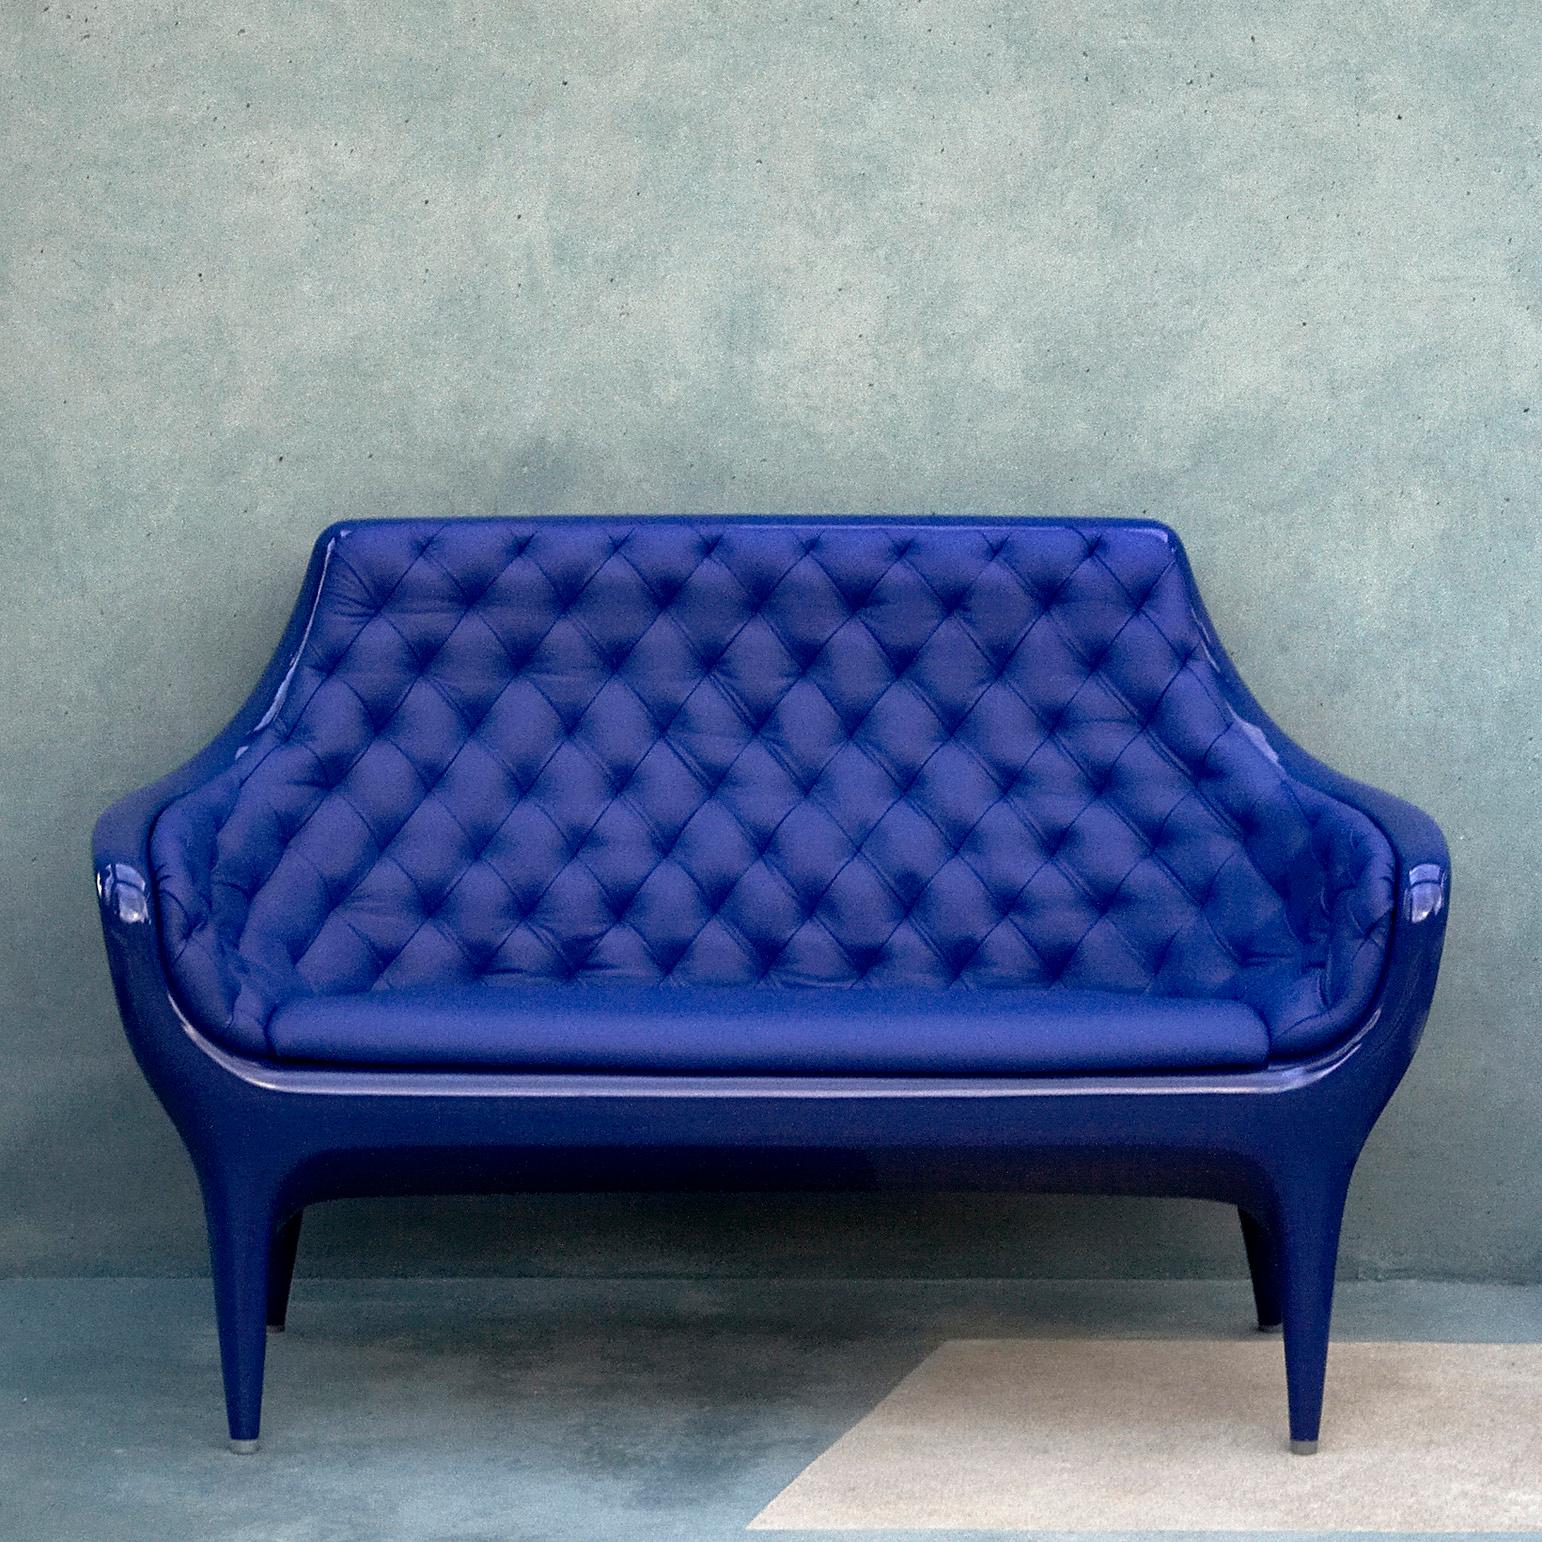 Modern Jaime Hayon Contemporary Blue Showtime Sofa Lacquered by BD Barcelona